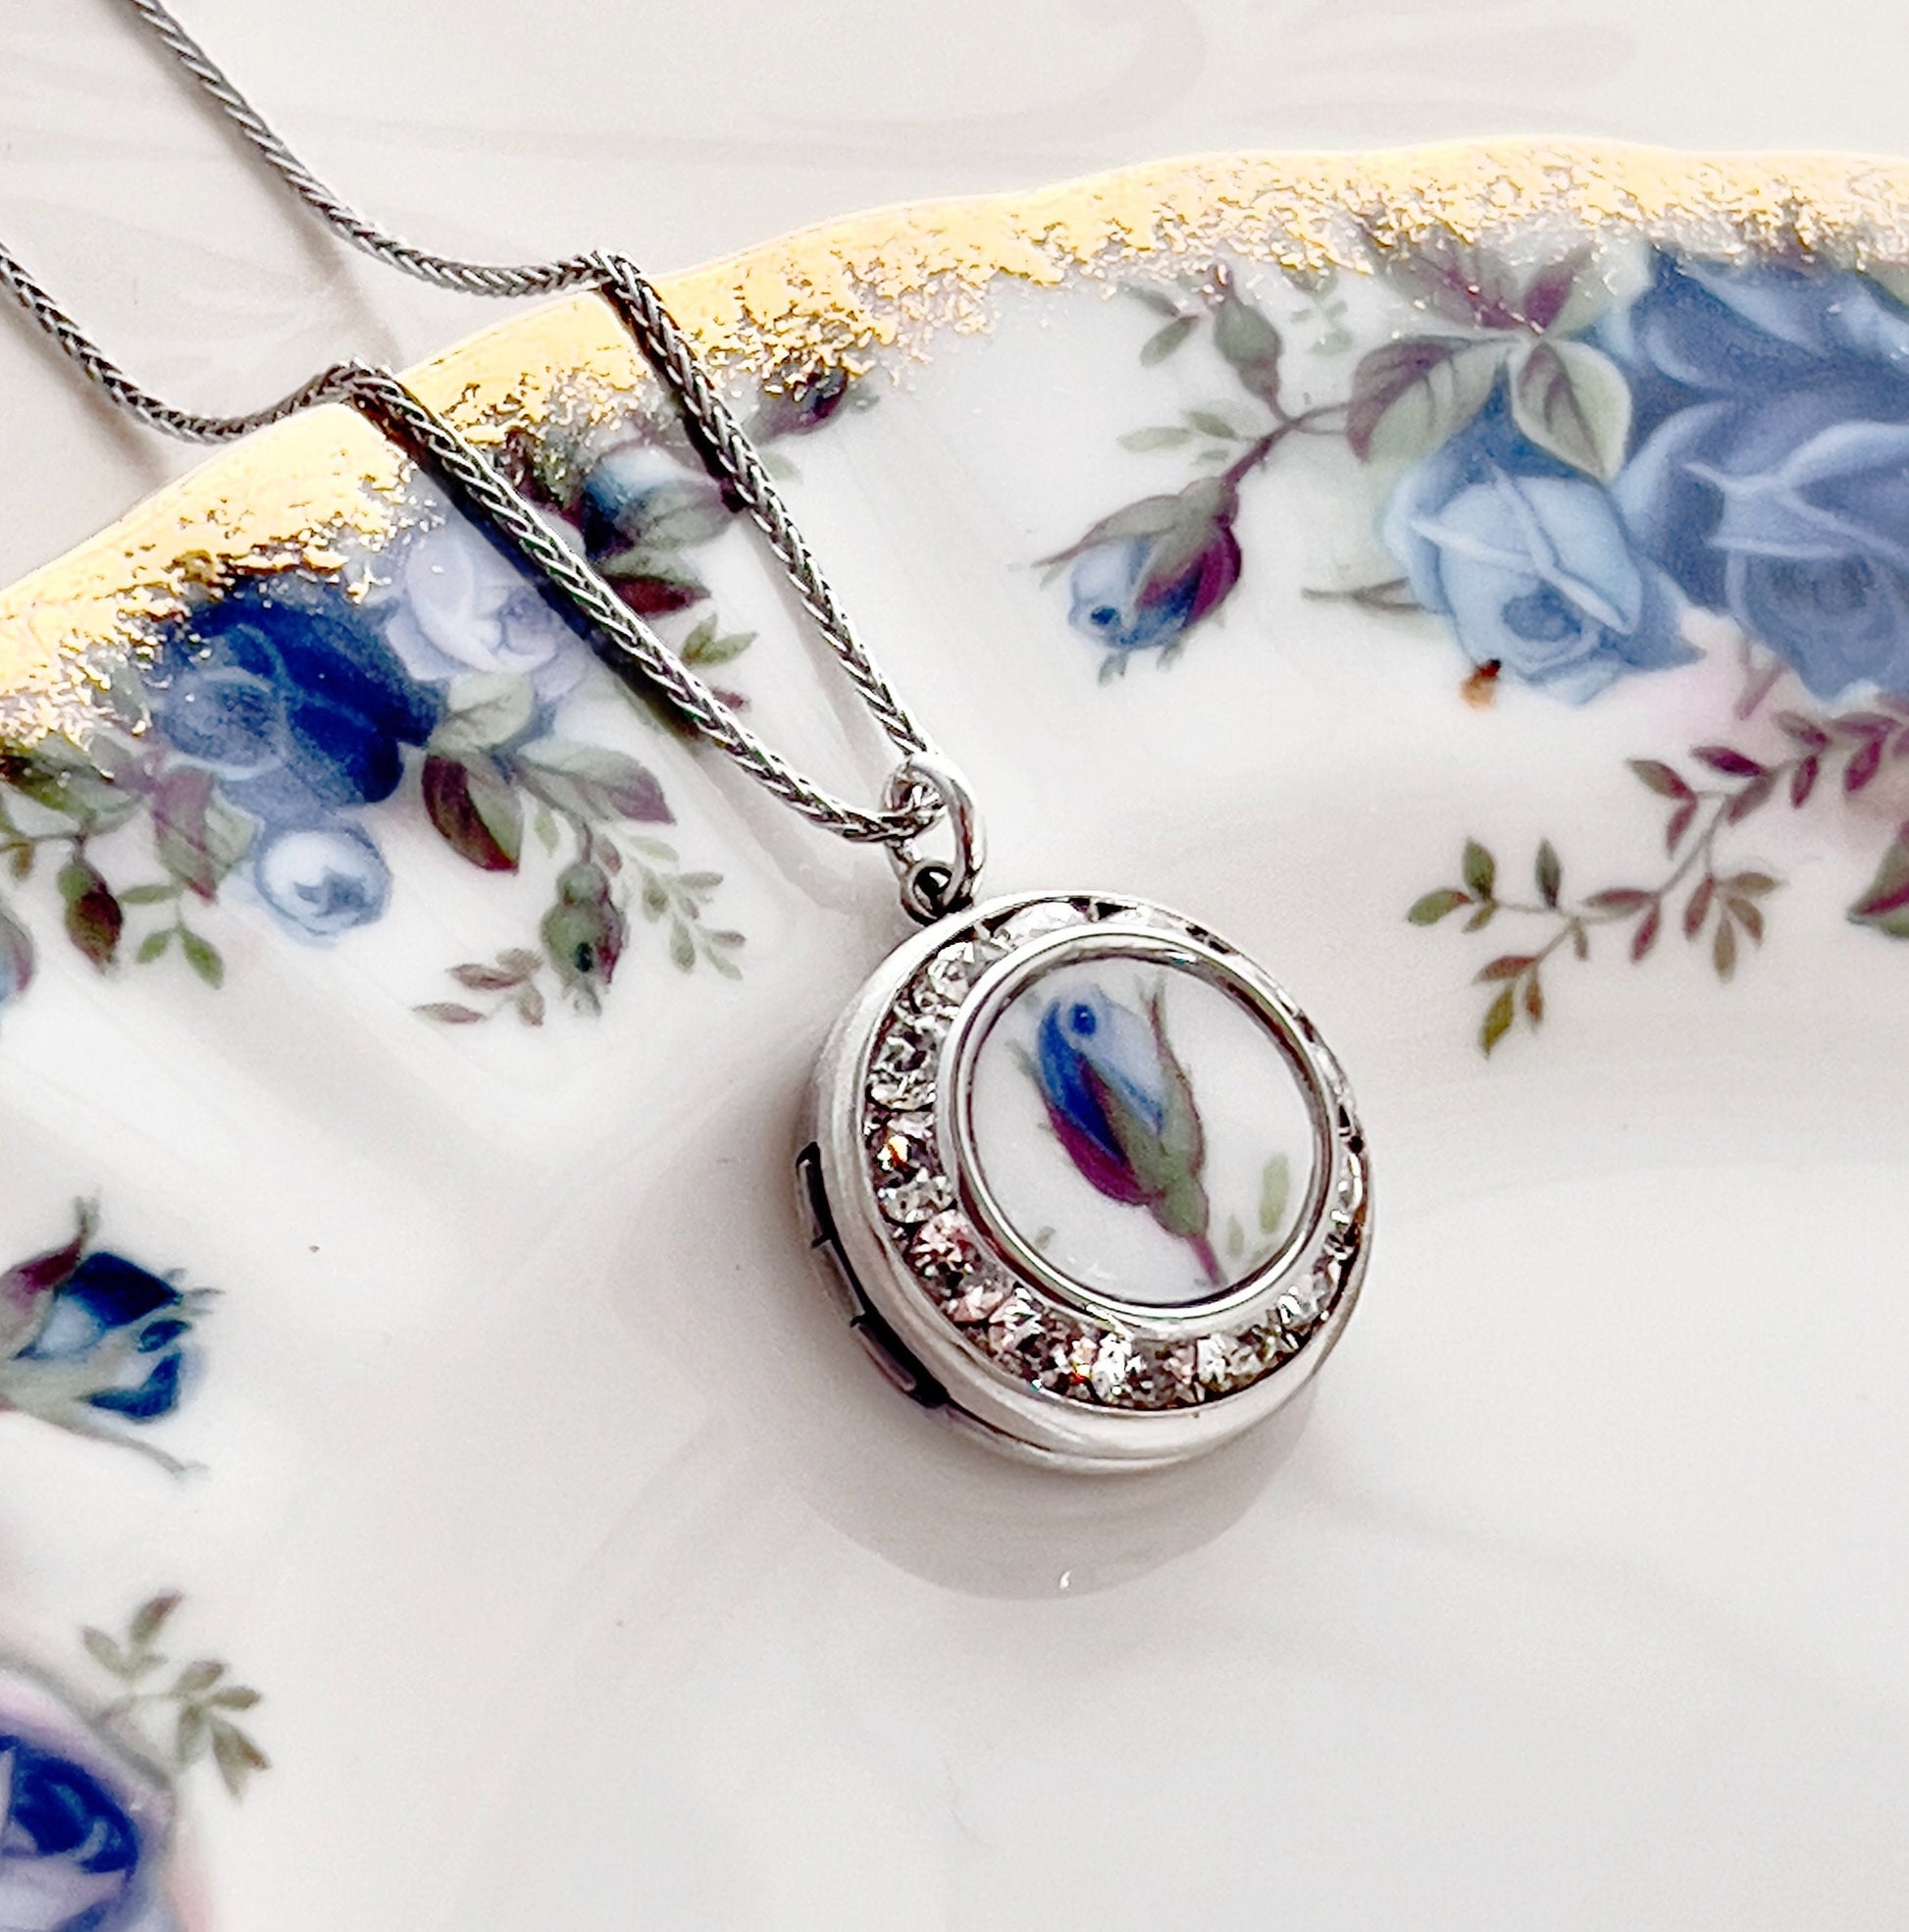 Adjustable Photo Locket Necklace, Unique Girlfriend Gift, Romantic Anniversary Gifts for Her, Broken China Jewelry